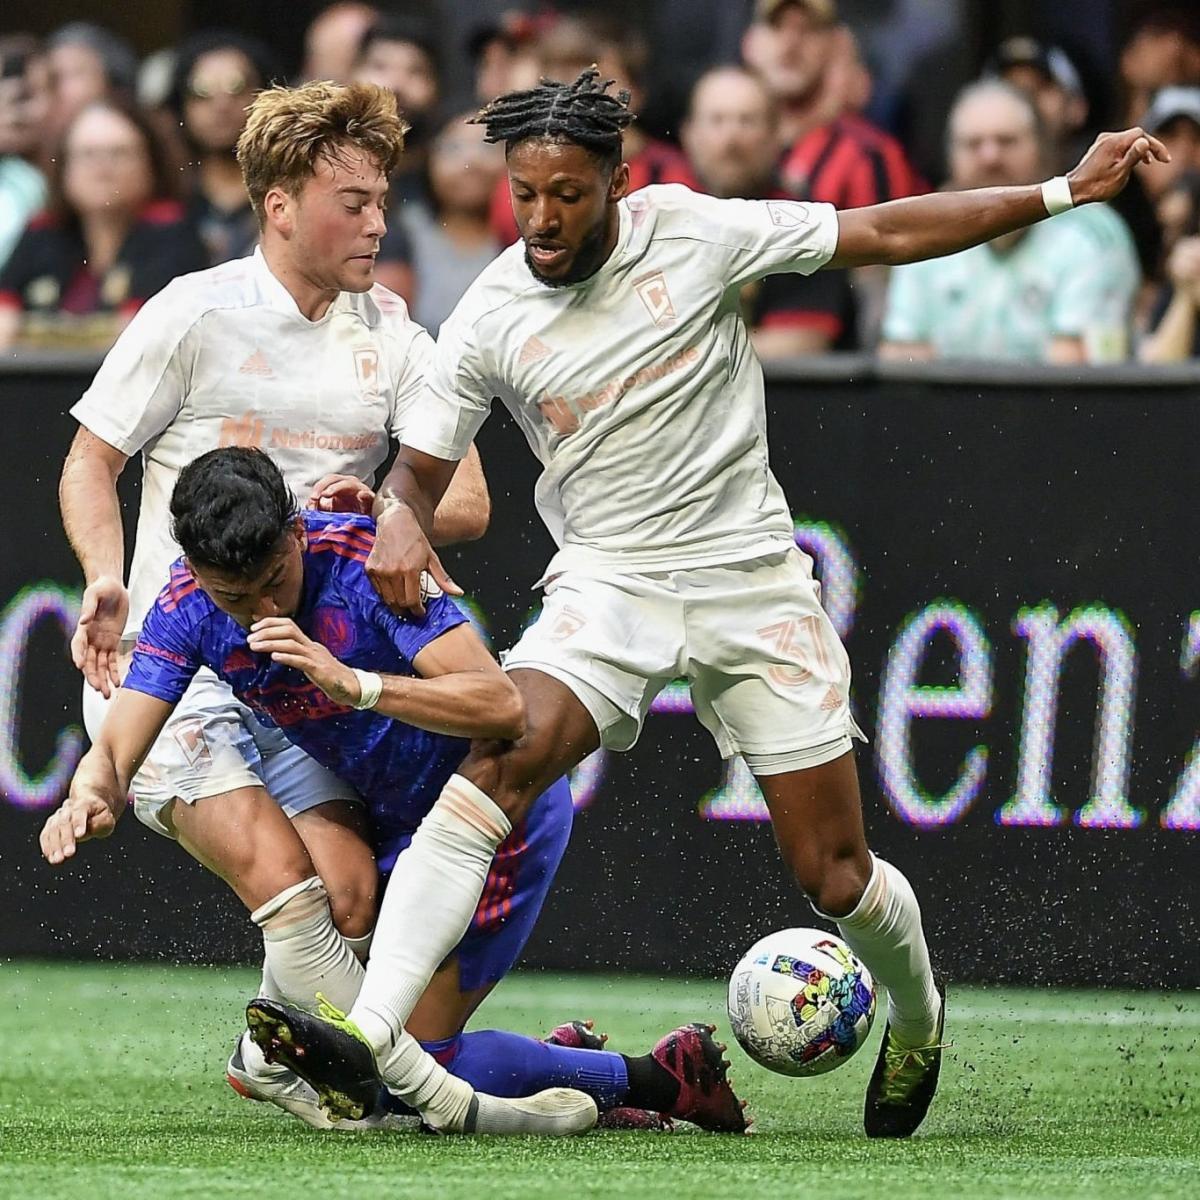 working hard for the steal. photo courtesy of the <strong><a  data-cke-saved-href='https://www.vavel.com/en-us/soccer/2022/05/24/mls/1112642-columbus-vs-lafc-and-weather-lose-0-2-at-home.html' href='https://www.vavel.com/en-us/soccer/2022/05/24/mls/1112642-columbus-vs-lafc-and-weather-lose-0-2-at-home.html'>Columbus Crew</a></strong>.